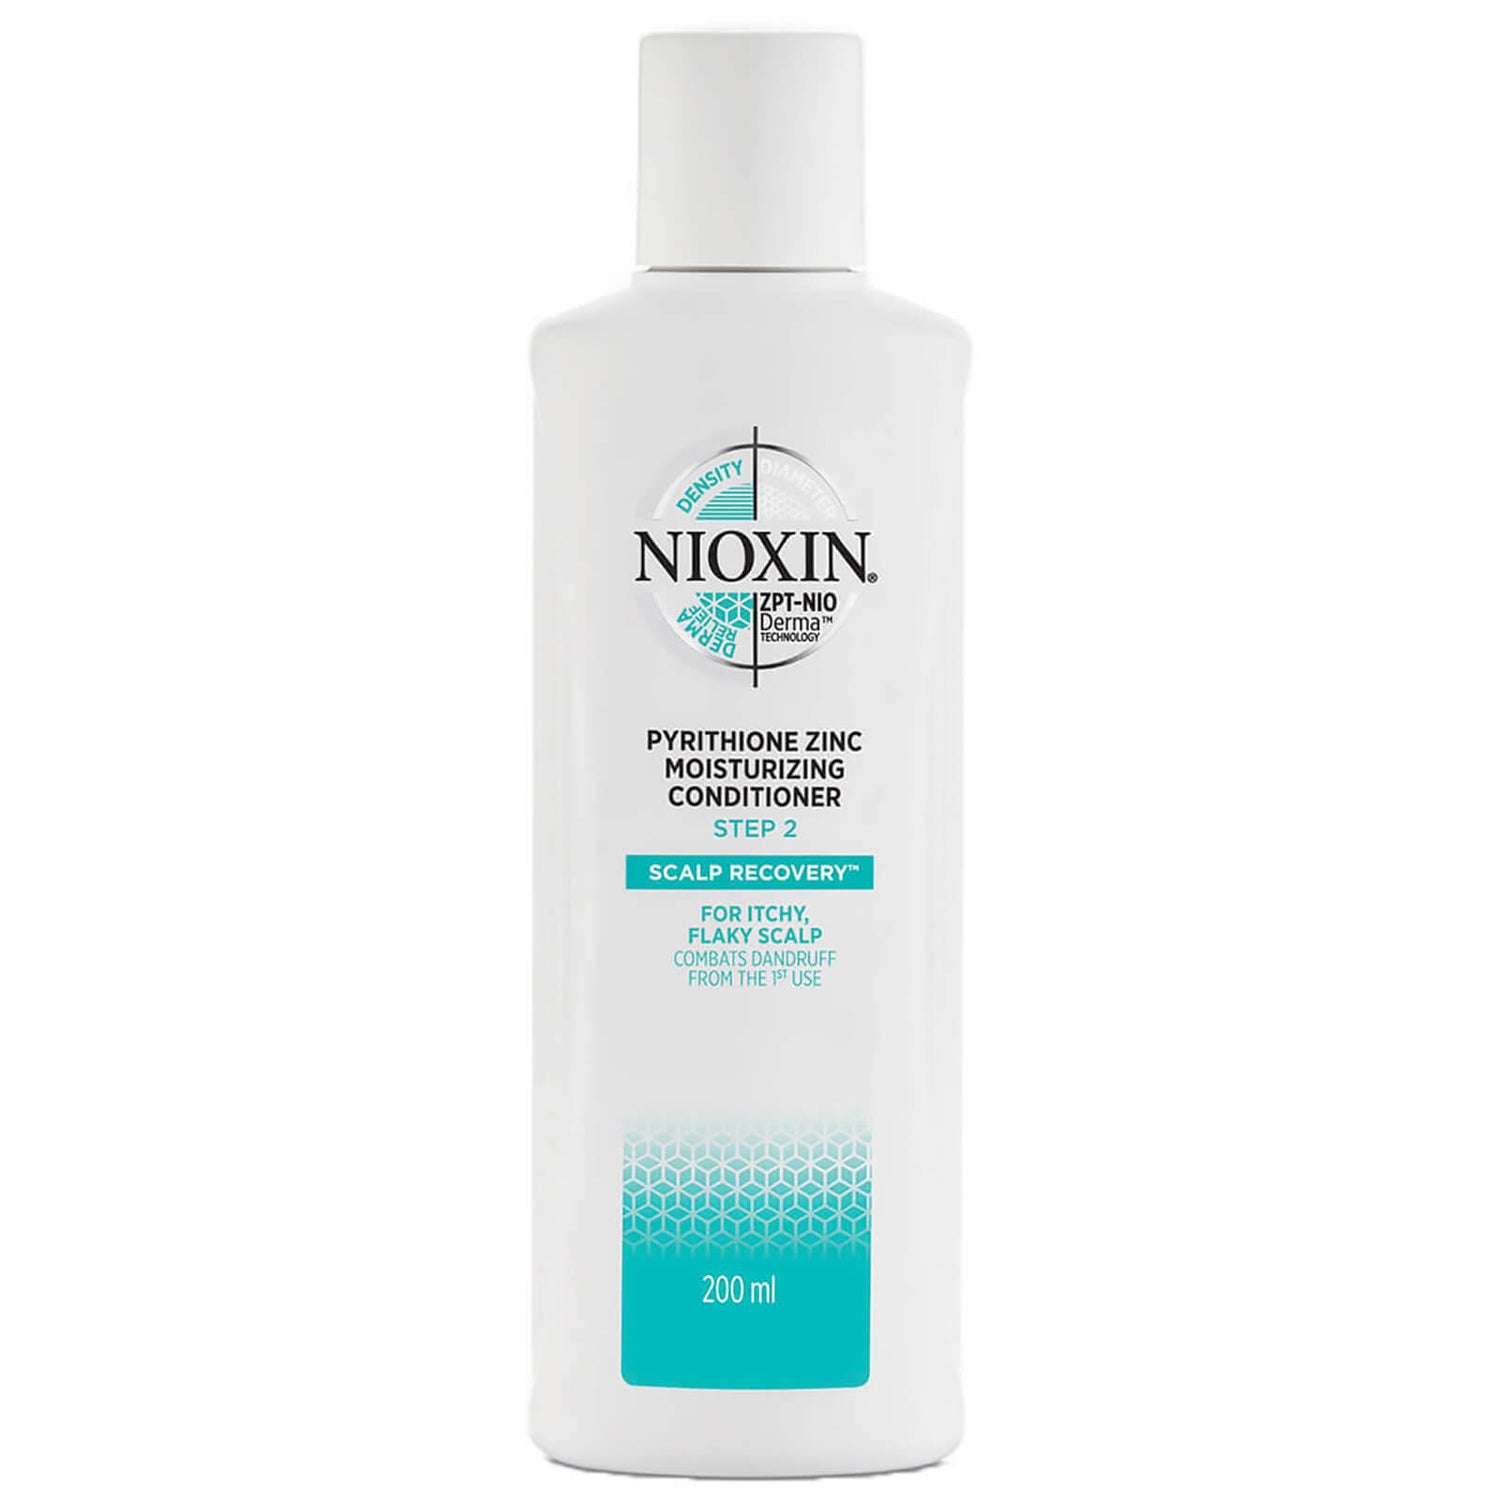 NIOXIN Scalp Recovery Anti-Dandruff Moisturising Conditioner for Itchy, Flaky Scalp 200ml